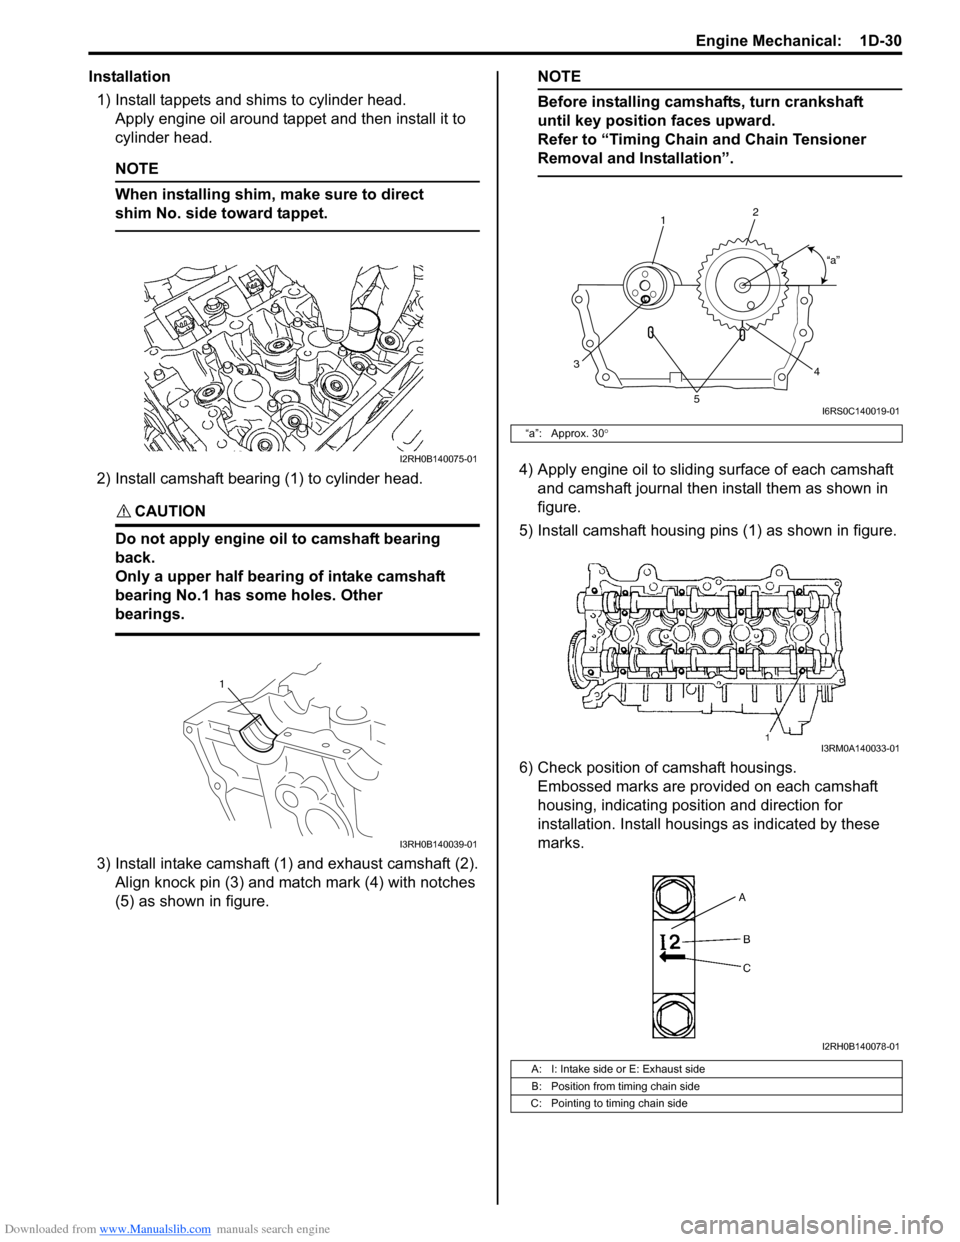 SUZUKI SWIFT 2008 2.G Service Workshop Manual Downloaded from www.Manualslib.com manuals search engine Engine Mechanical:  1D-30
Installation1) Install tappets and shims to cylinder head. Apply engine oil around tappet and then install it to 
cyl